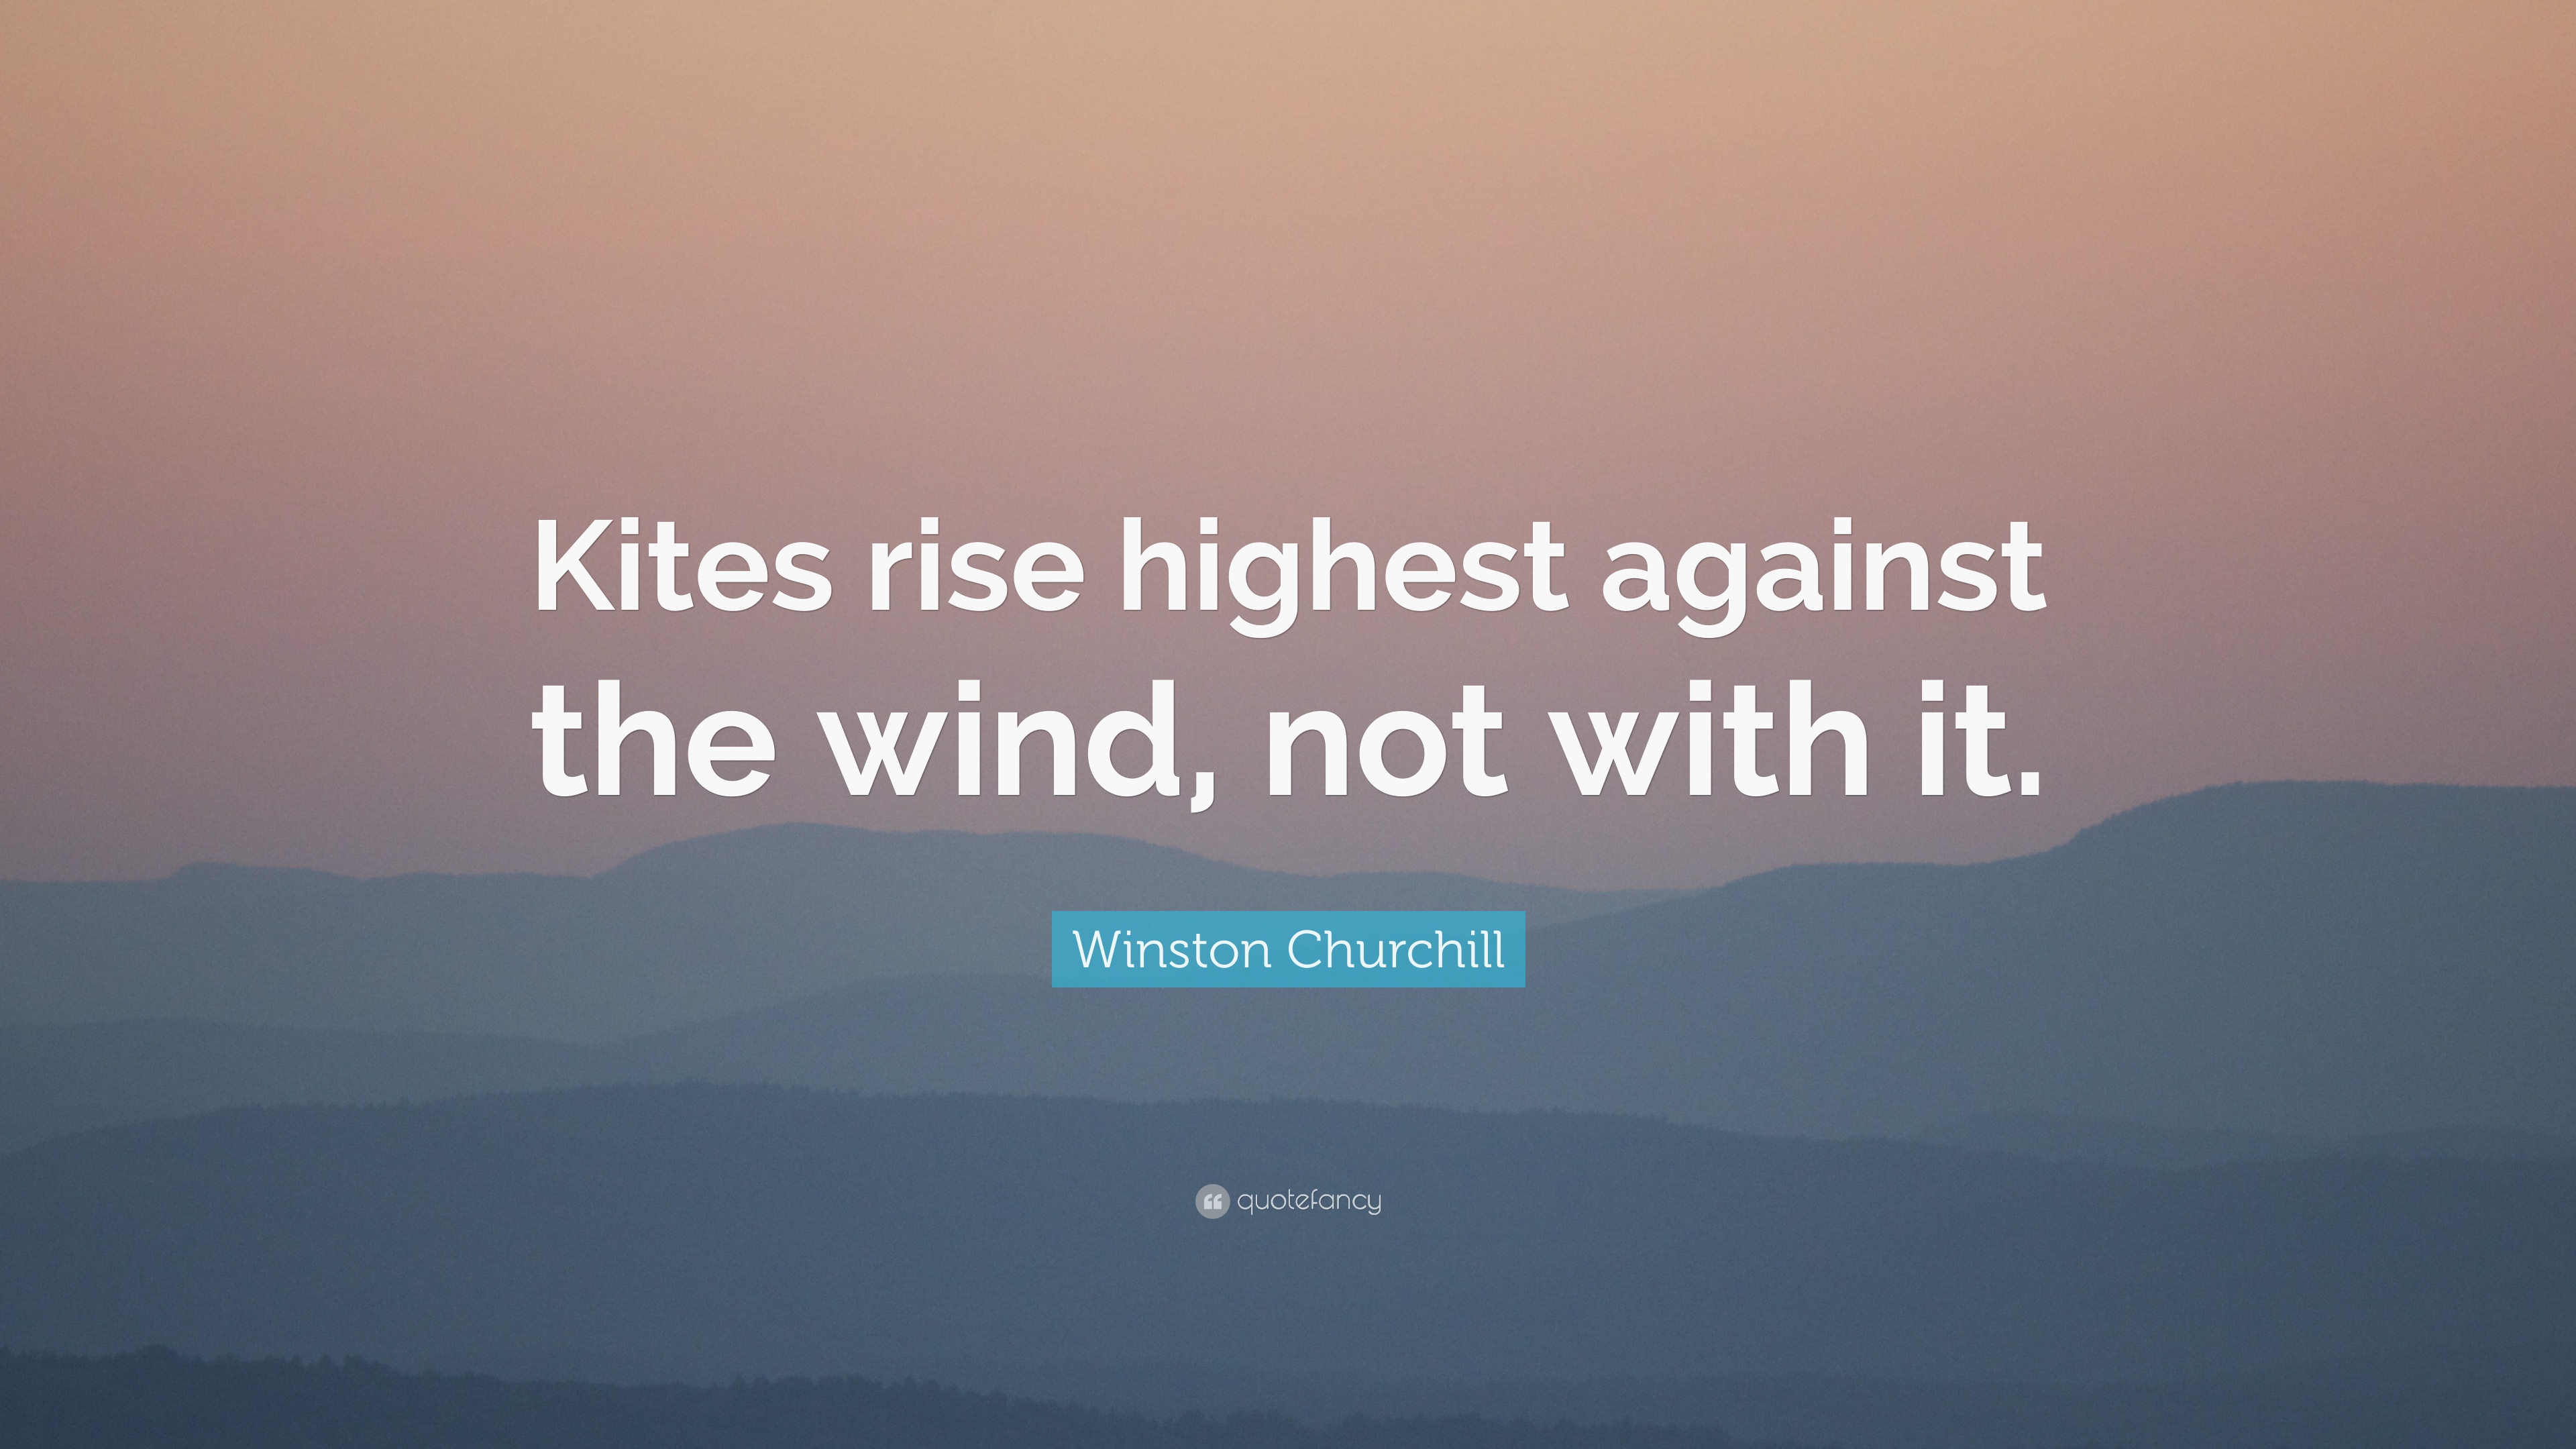 Winston Churchill Quote: “Kites rise highest against the wind, not ...